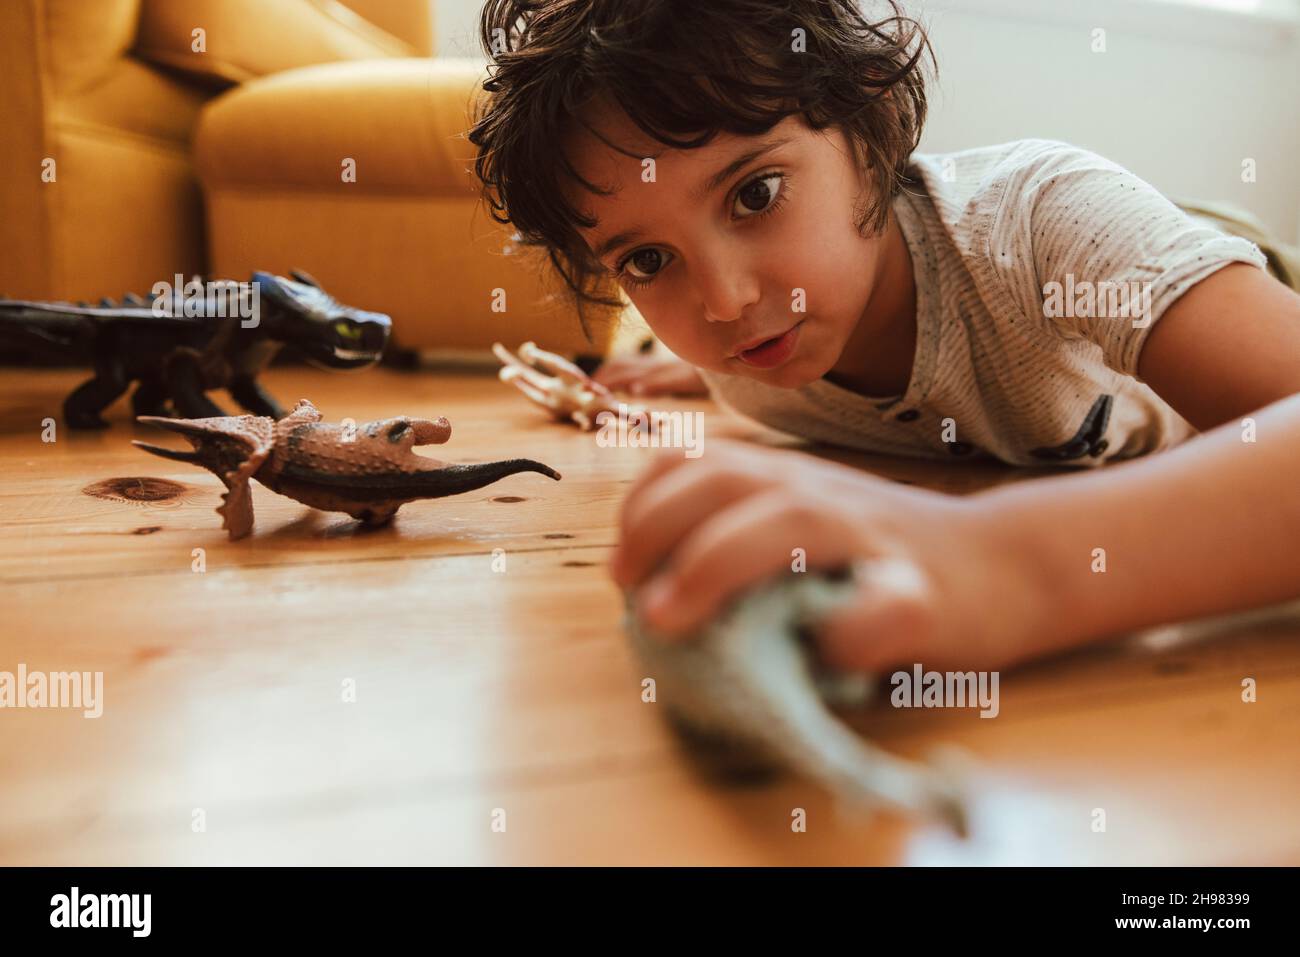 Little boy playing with his toys at home. Adorable young boy lying on the floor while playing with animal toys in his play area. Stock Photo